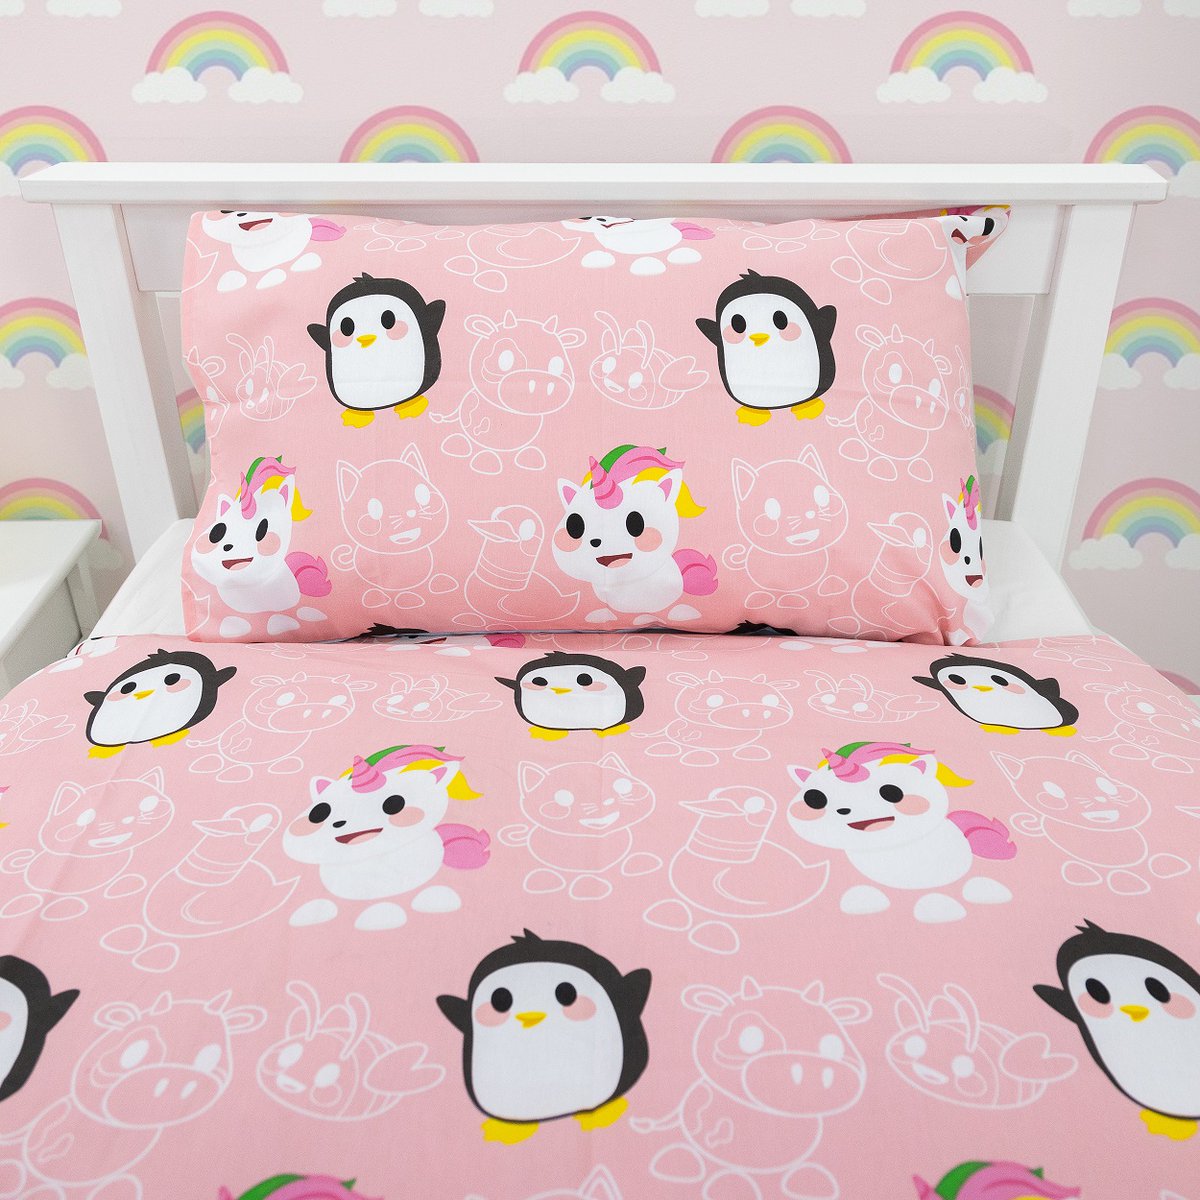 We're so excited to partner with @CharacterWorld_ and Jay Franco to launch Adopt Me bedding! Available now online and in stores, you can get Adopt Me blankets & bed sets from Argos stores in the UK and Walmart stores in the US. We can't wait to see this in people's homes! 😍